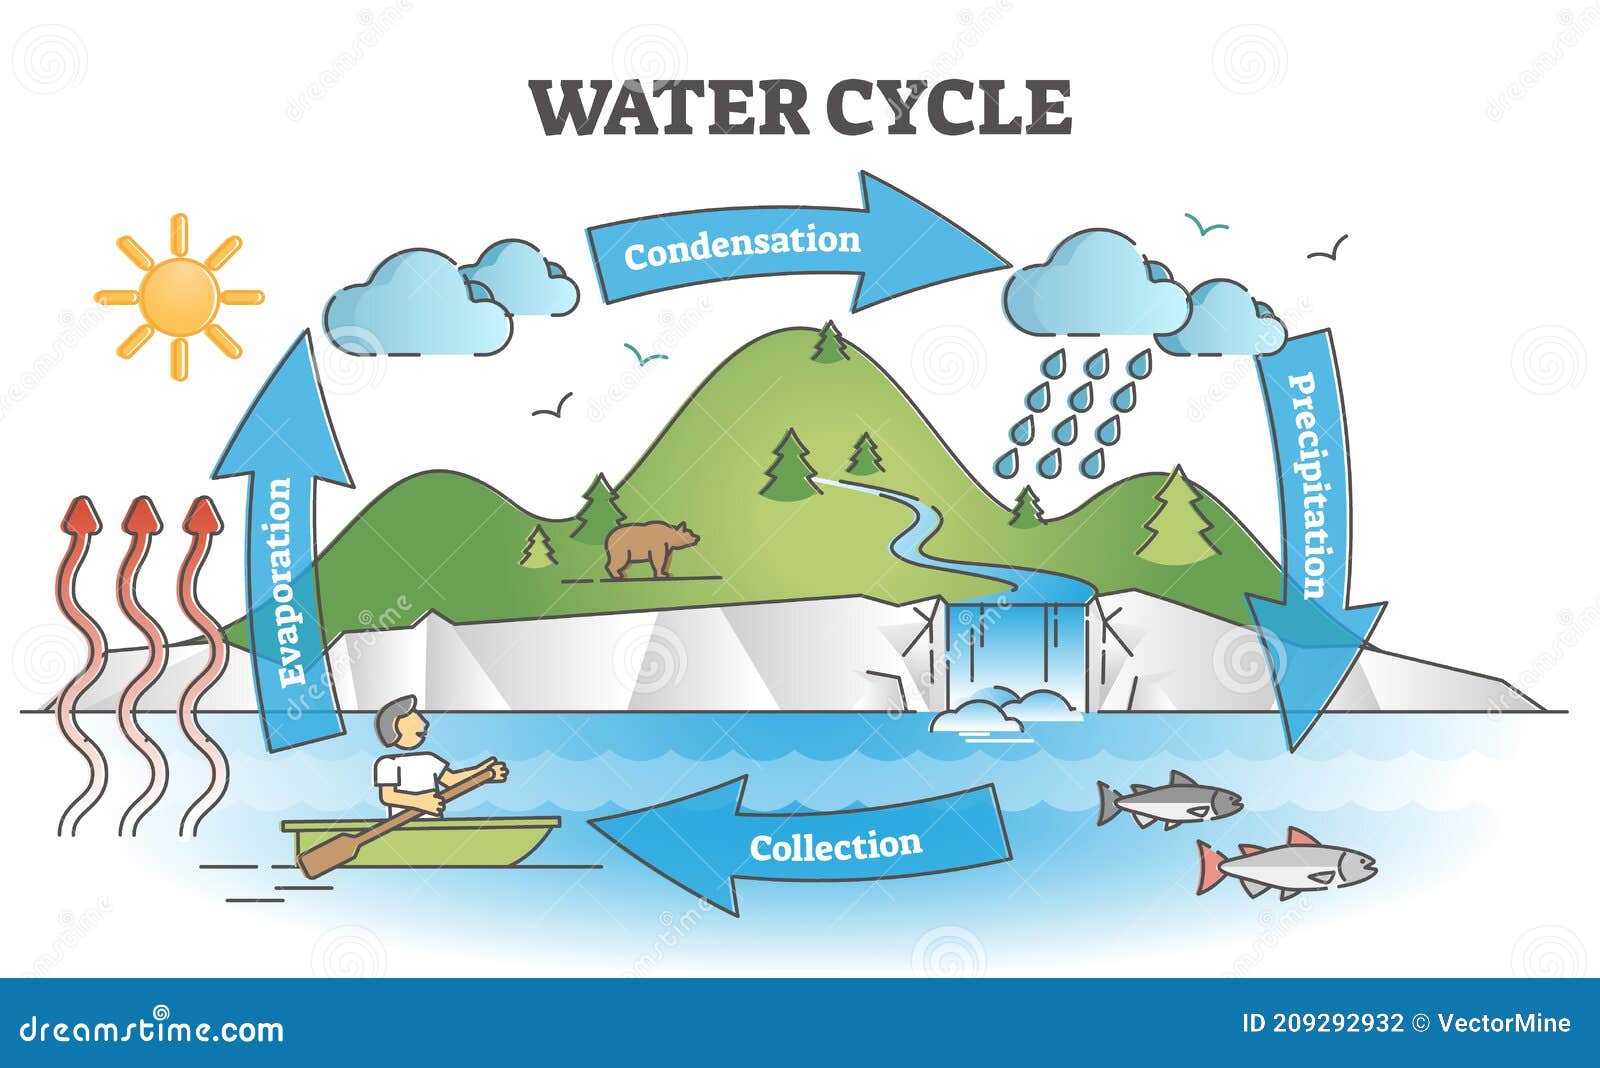 Draw a neat and labeled diagram of water cycle in nature.